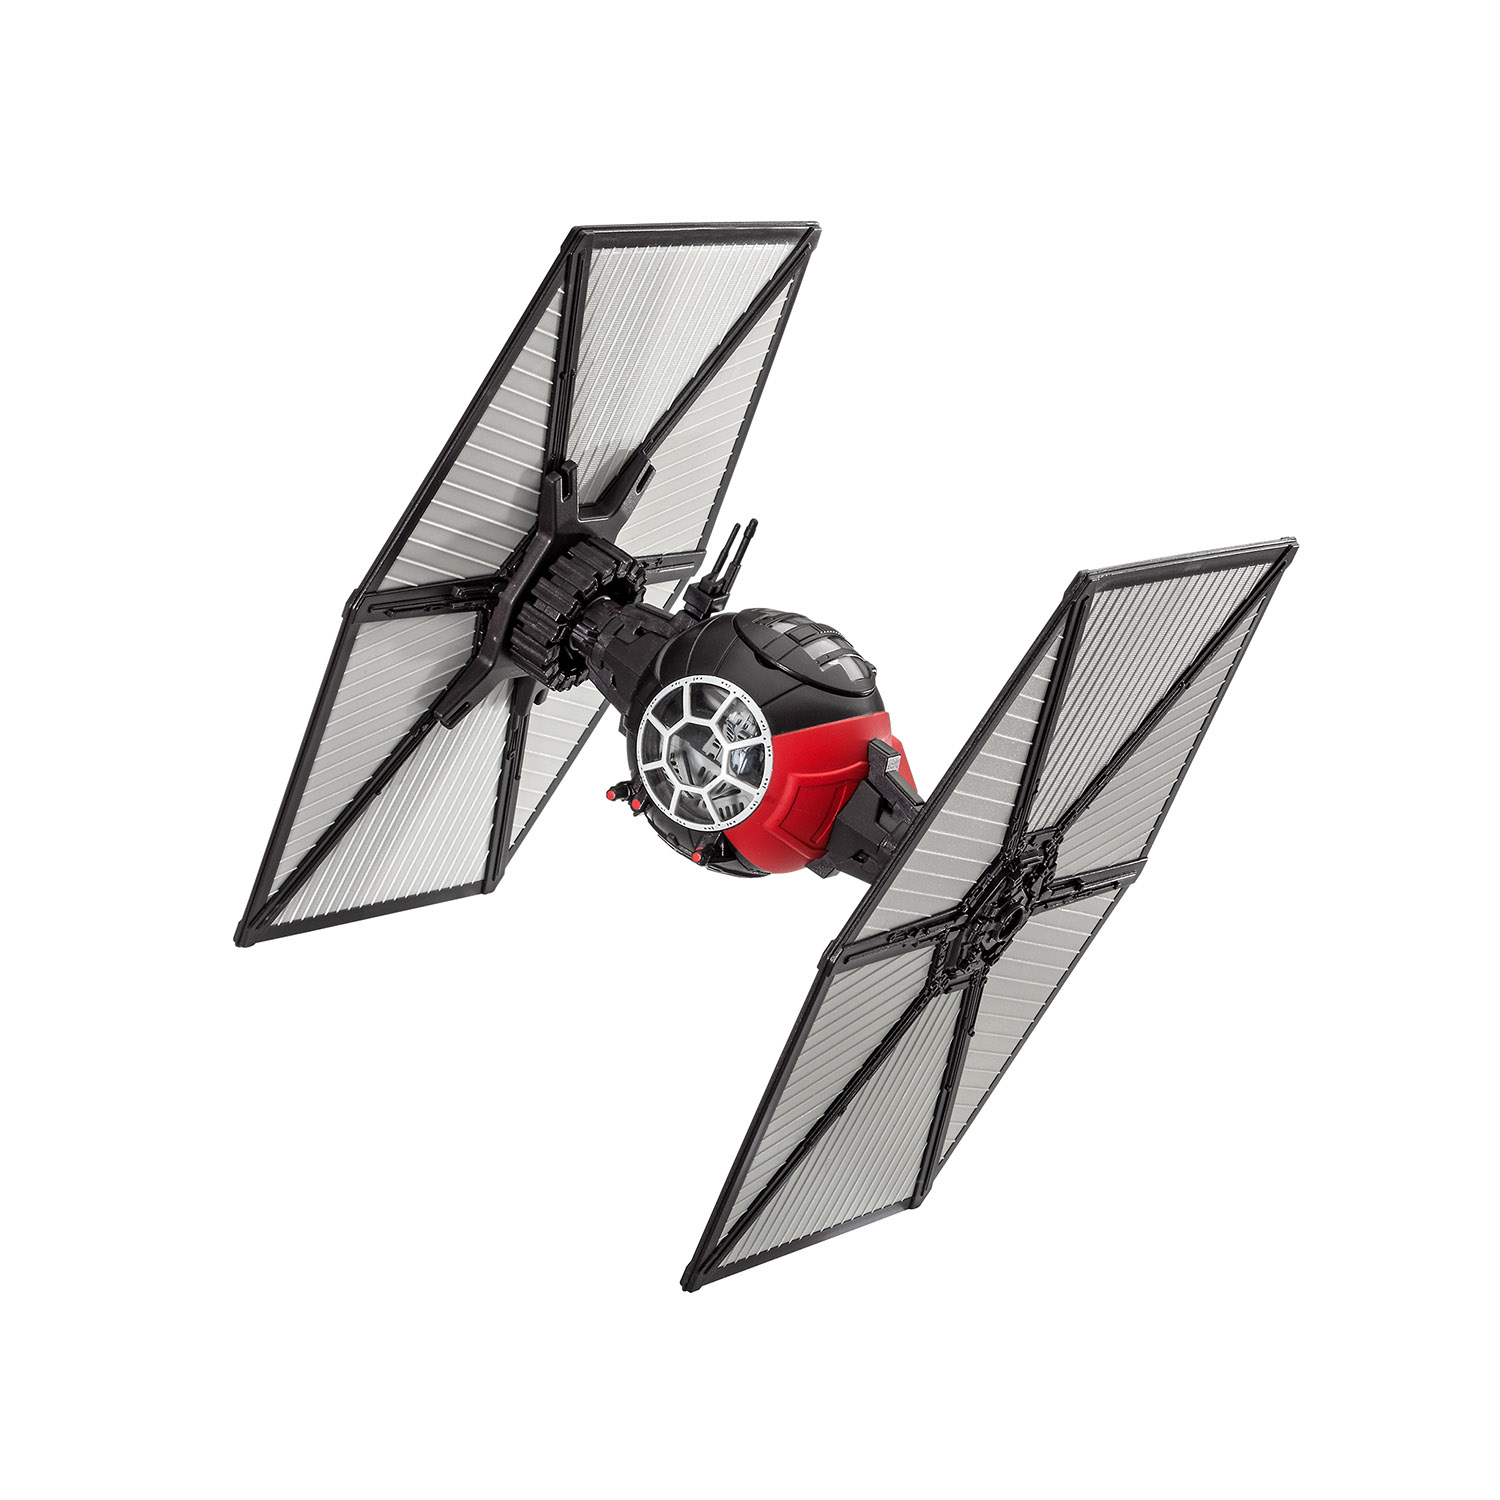 Revell Build & Play - Tie Fighter